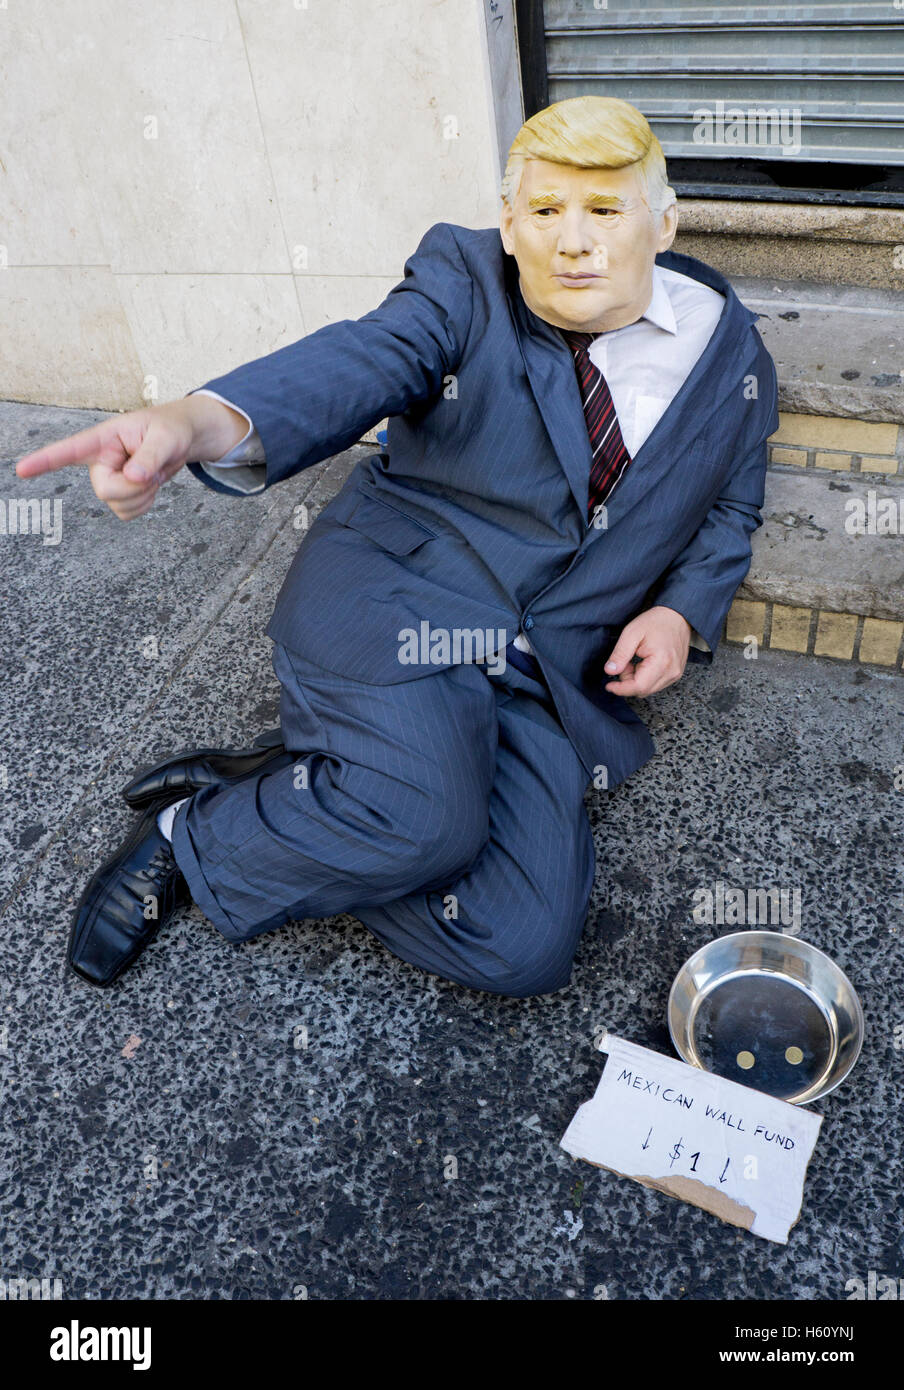 Man in a Donald Trump mask and suit allegedly collecting money to build a Mexican wall at the border. In downtown New York City Stock Photo